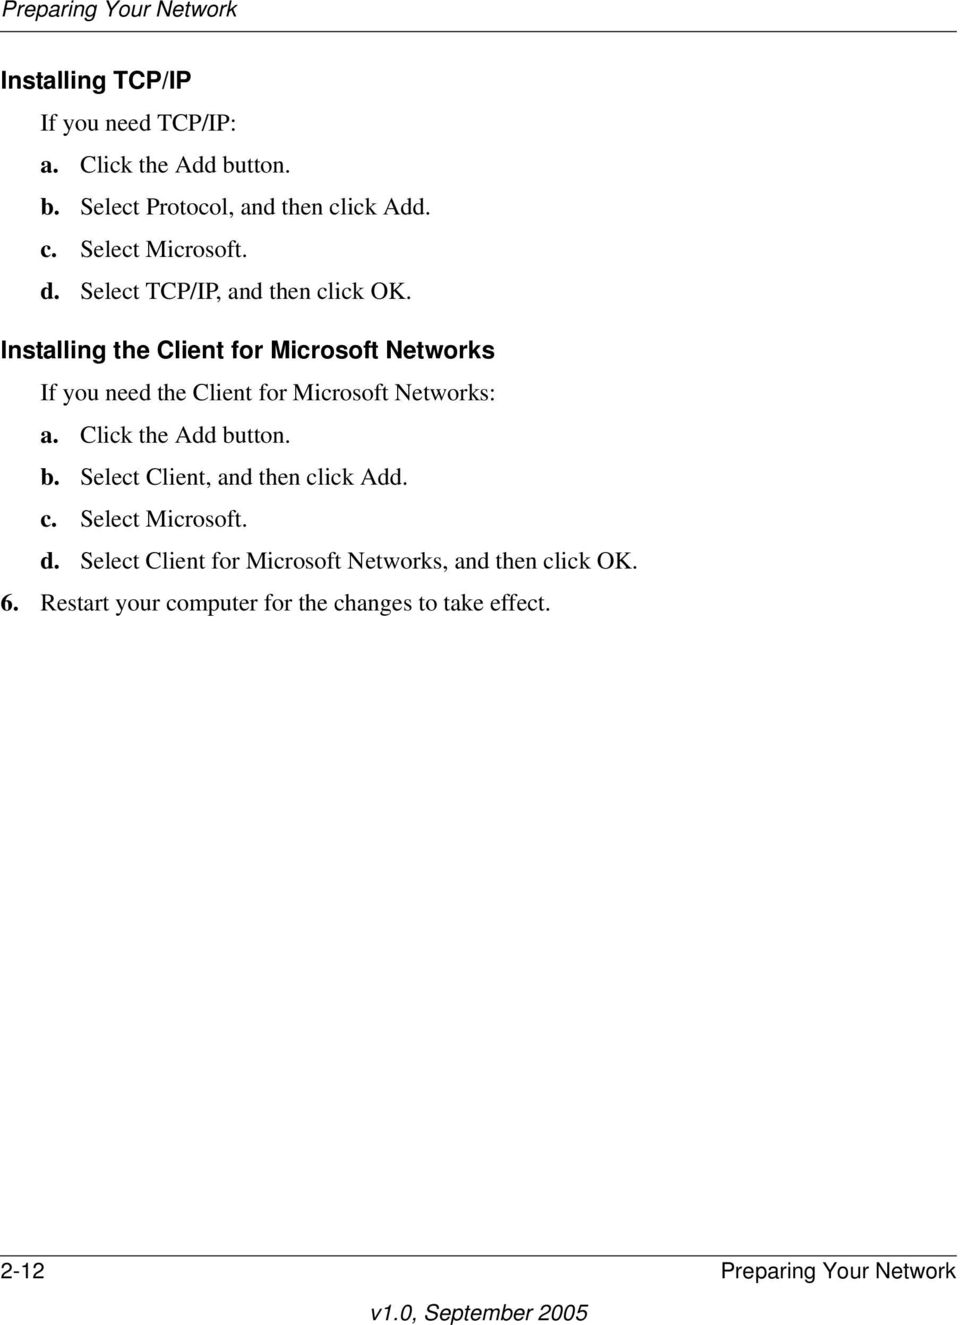 Installing the Client for Microsoft Networks If you need the Client for Microsoft Networks: a. Click the Add bu